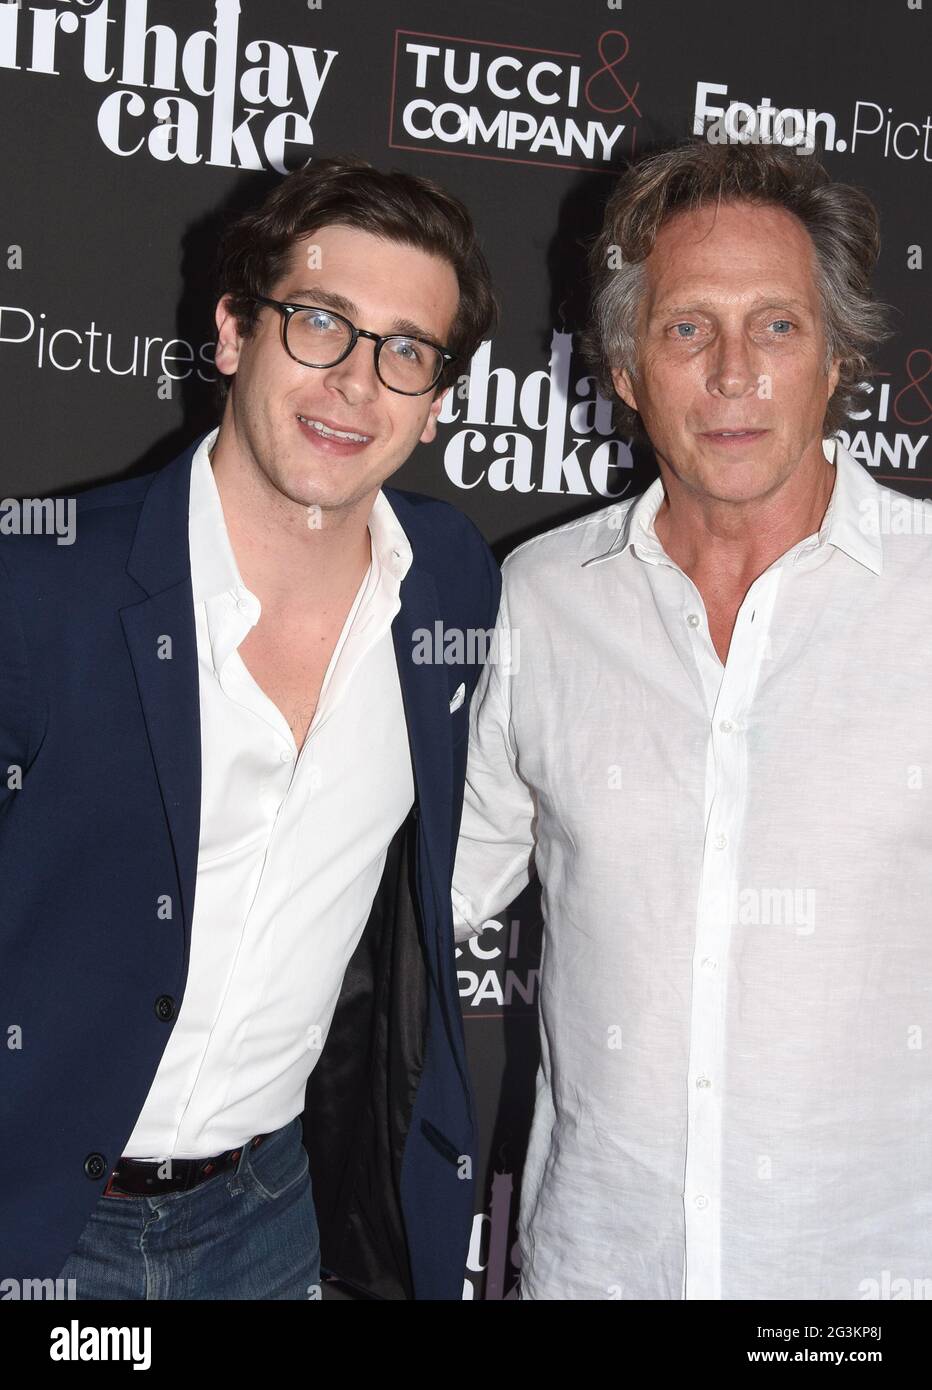 Beverly Hills, California, USA 16th June 2021 Actor Sam Fichtner and father actor William Fichtner attends The Los Angeles Premiere of The Birthday Cake on June 16, 2021 at Fine Arts Theater in Beverly Hills, California, USA. Photo by Barry King/Alamy Live News Stock Photo